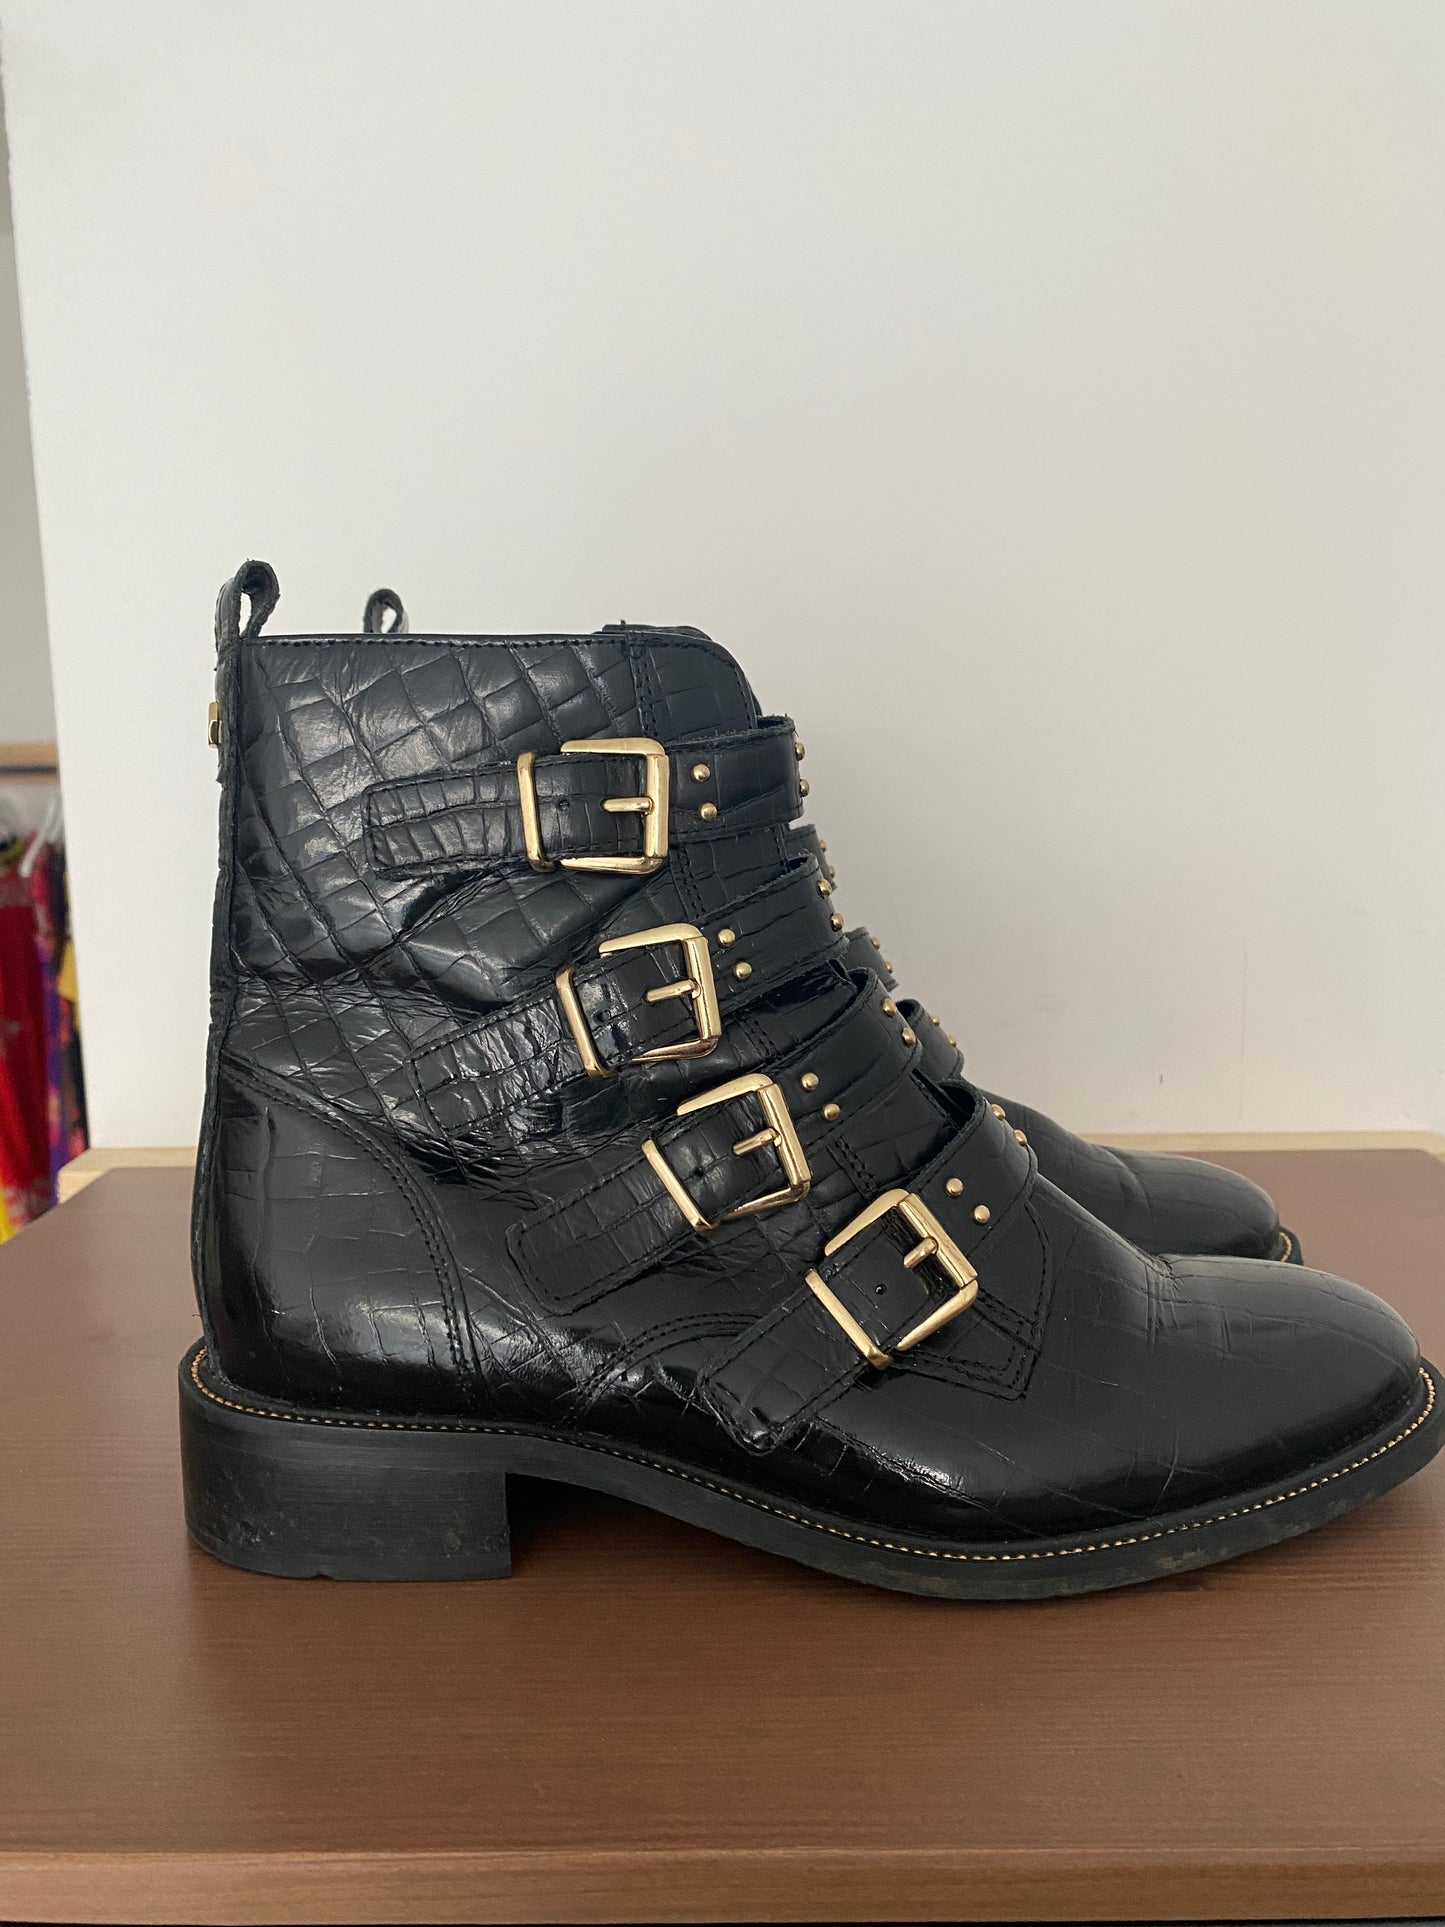 Carvella Black Leather Buckle Ankle Boots Size 7